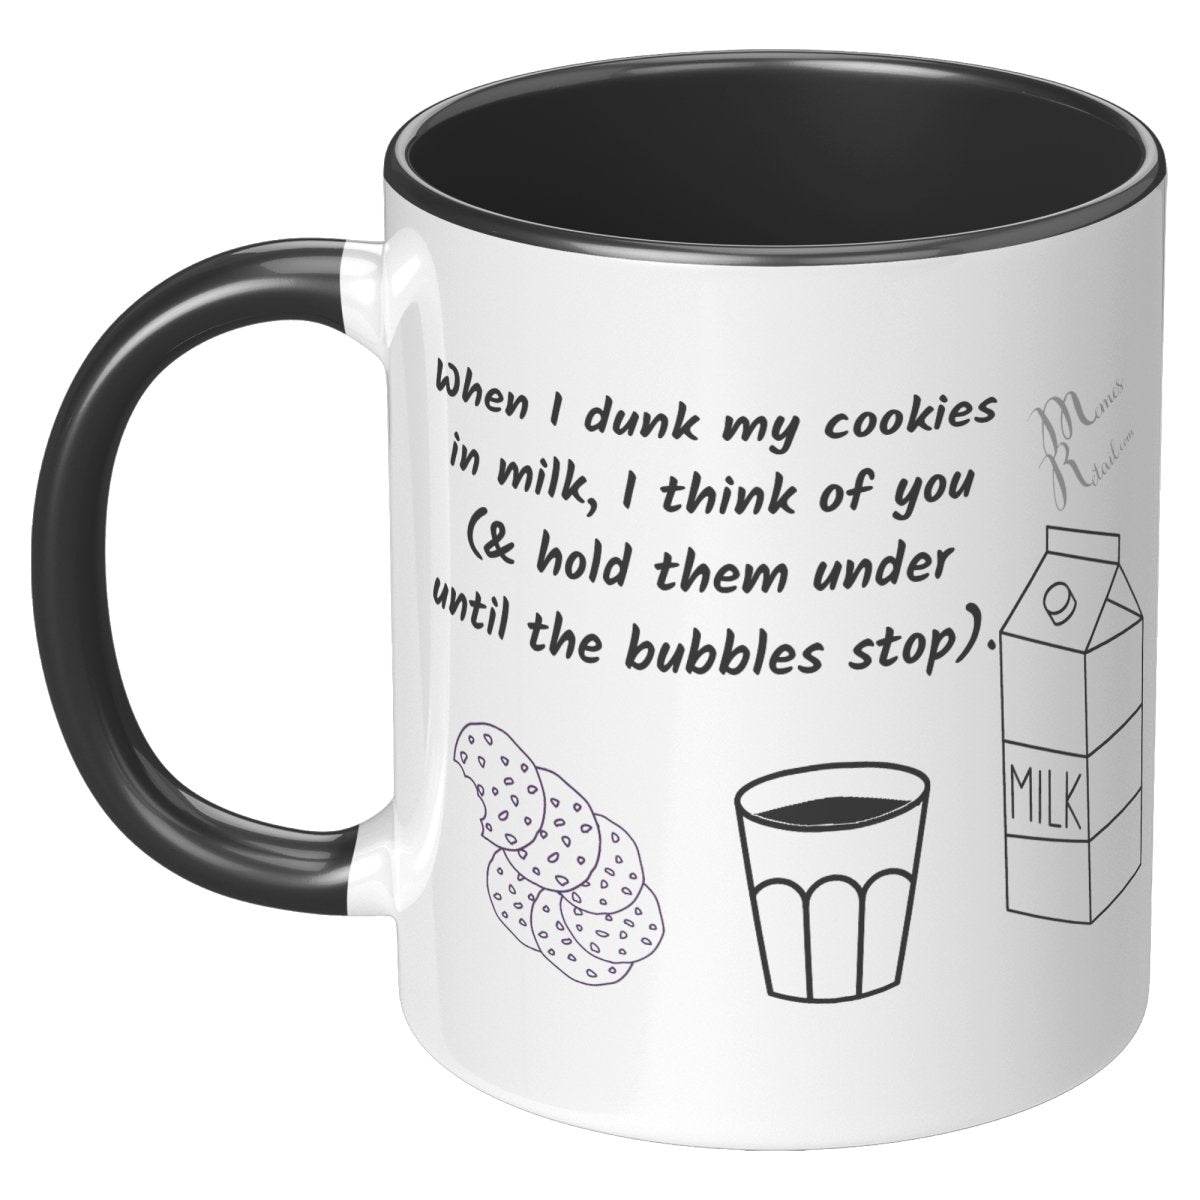 When I dunk My Cookies in Milk, I think of You - 11oz/15oz Mugs, 11oz / Black Accent - MemesRetail.com